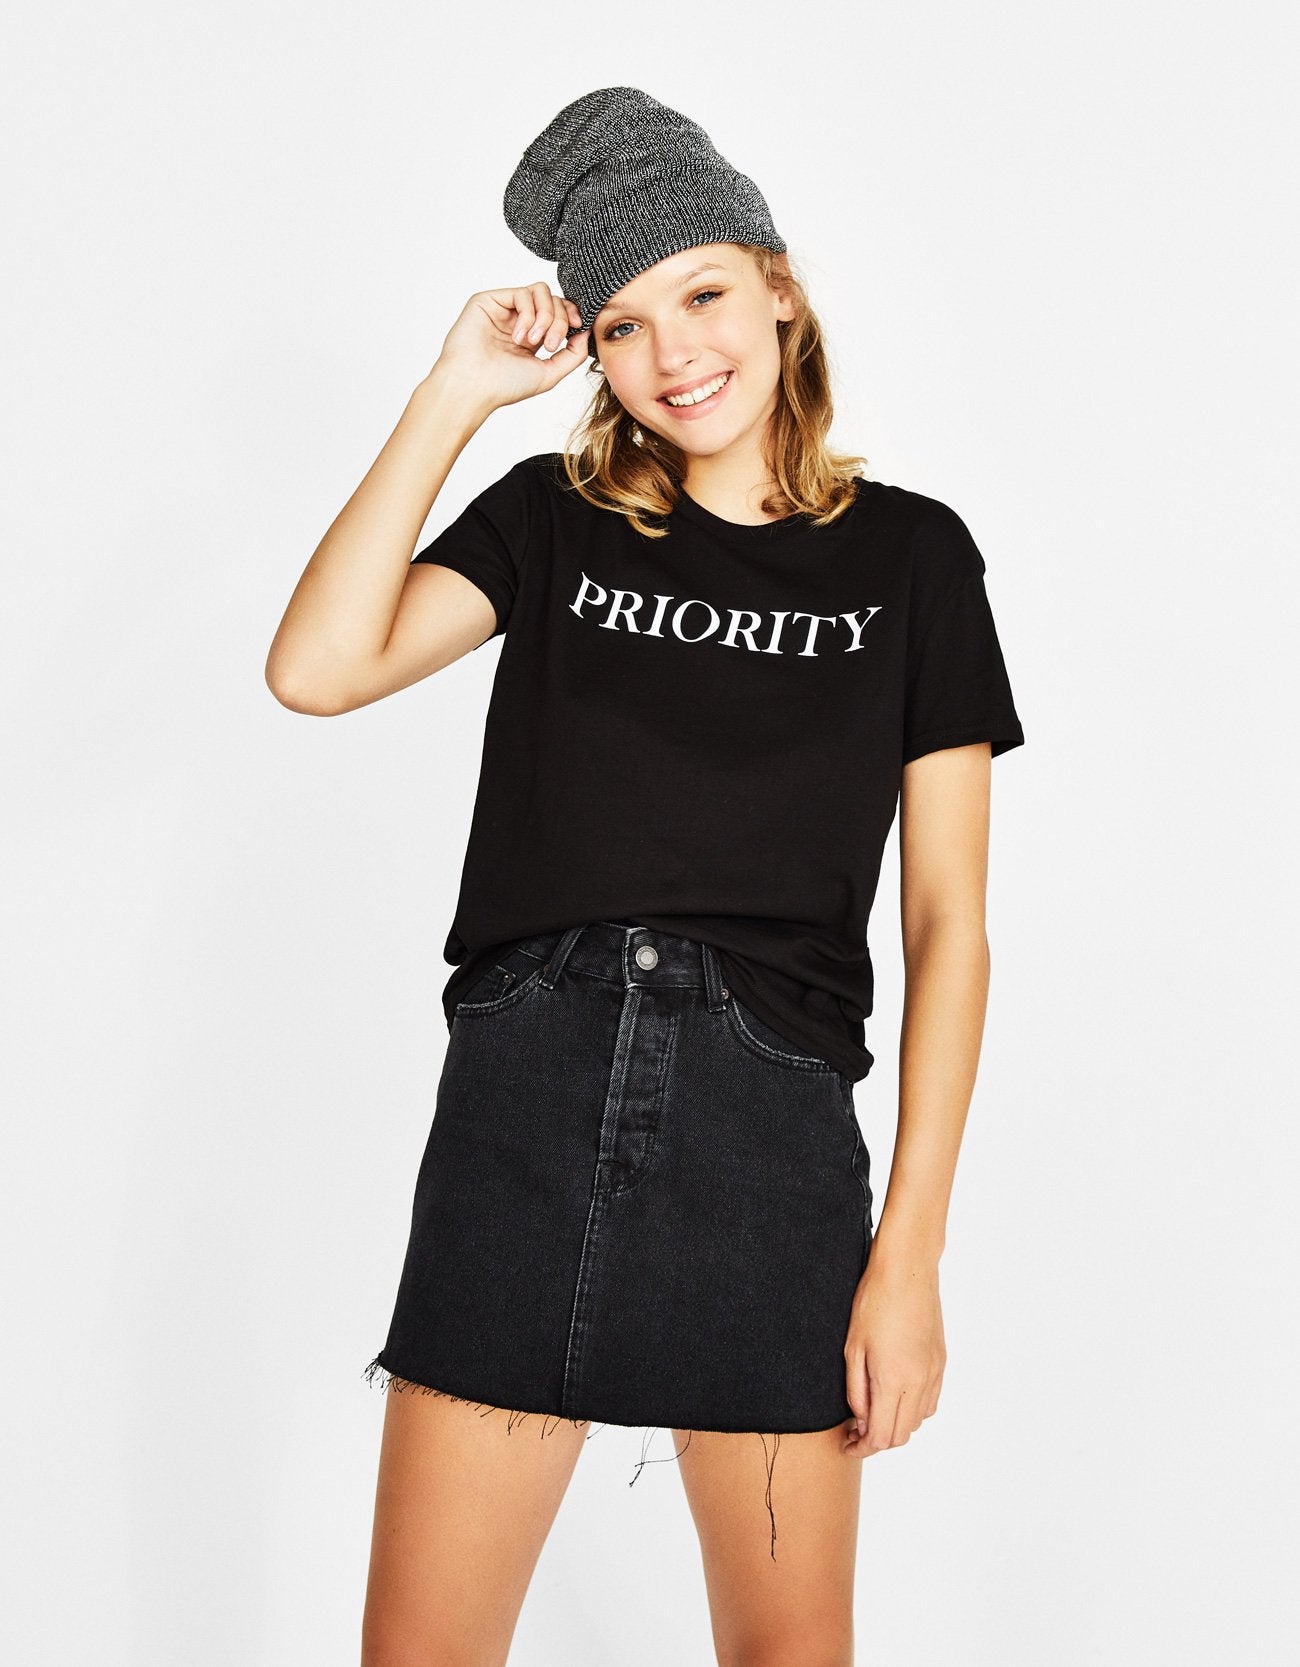 Priority Printed Womens Half Sleeves T-Shirts-FunkyTradition